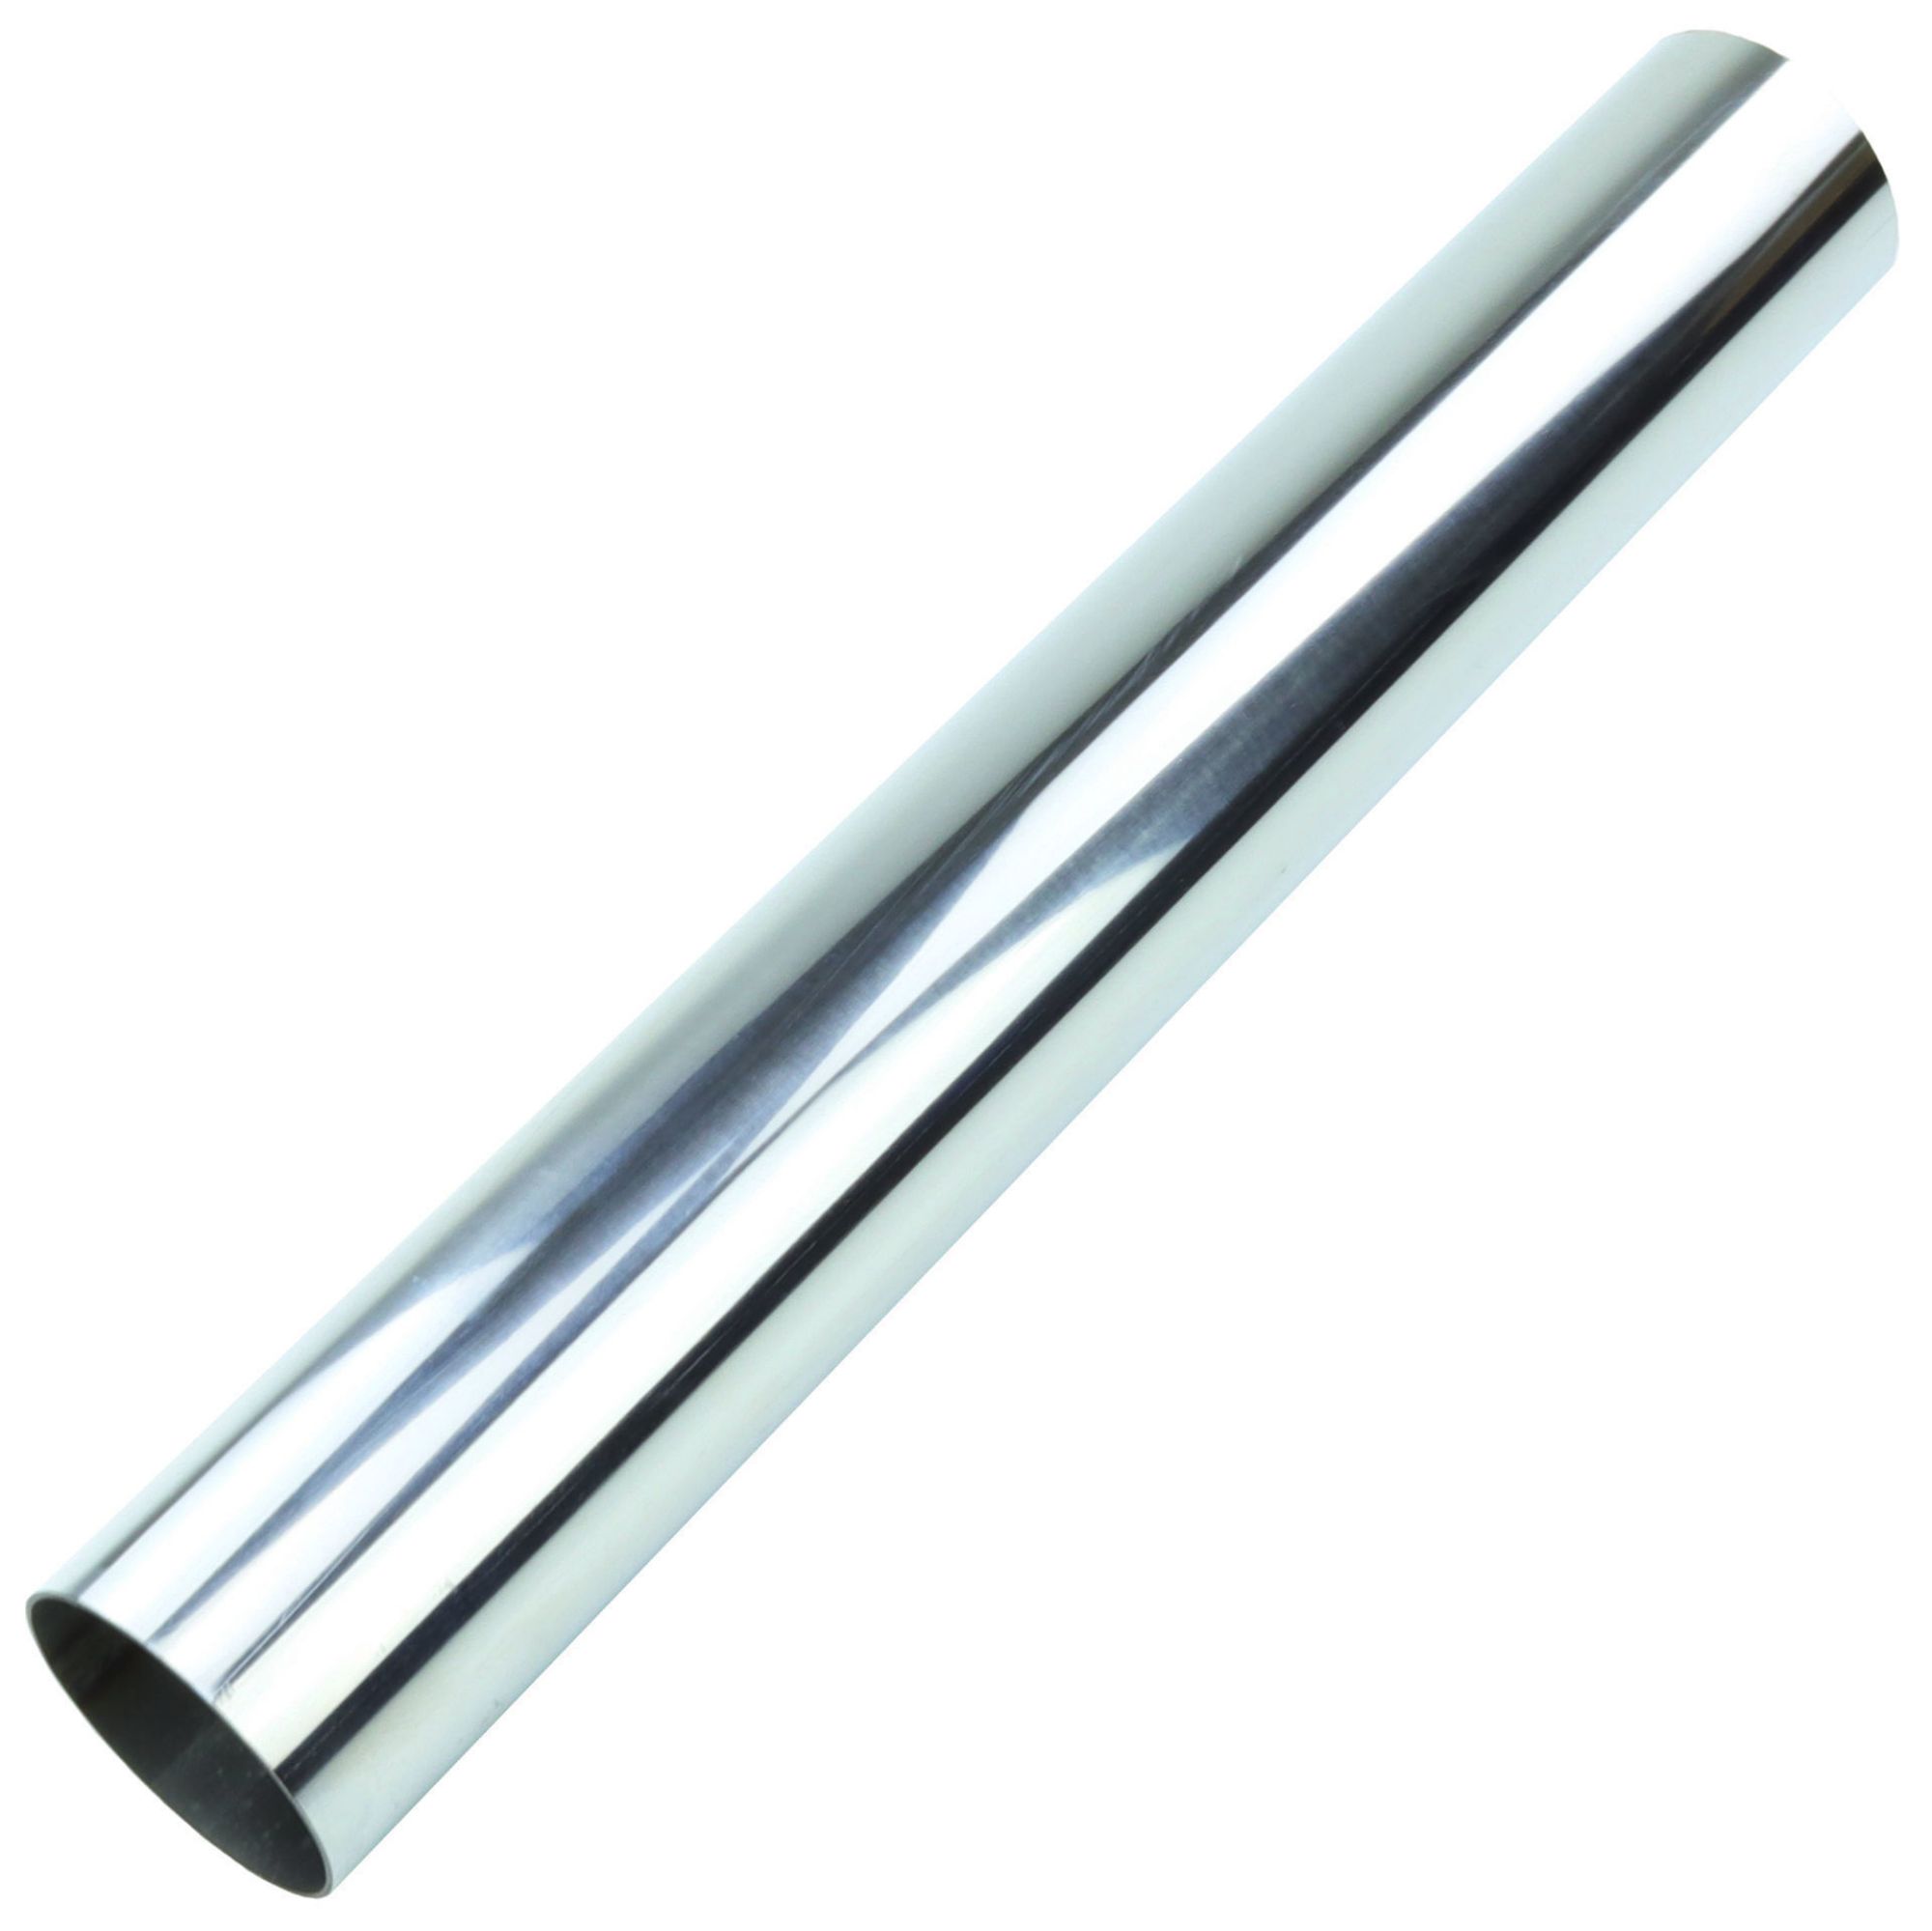 Stainless Steel Straight Exhaust Pipe (3.5 inch OD 5' feet long)